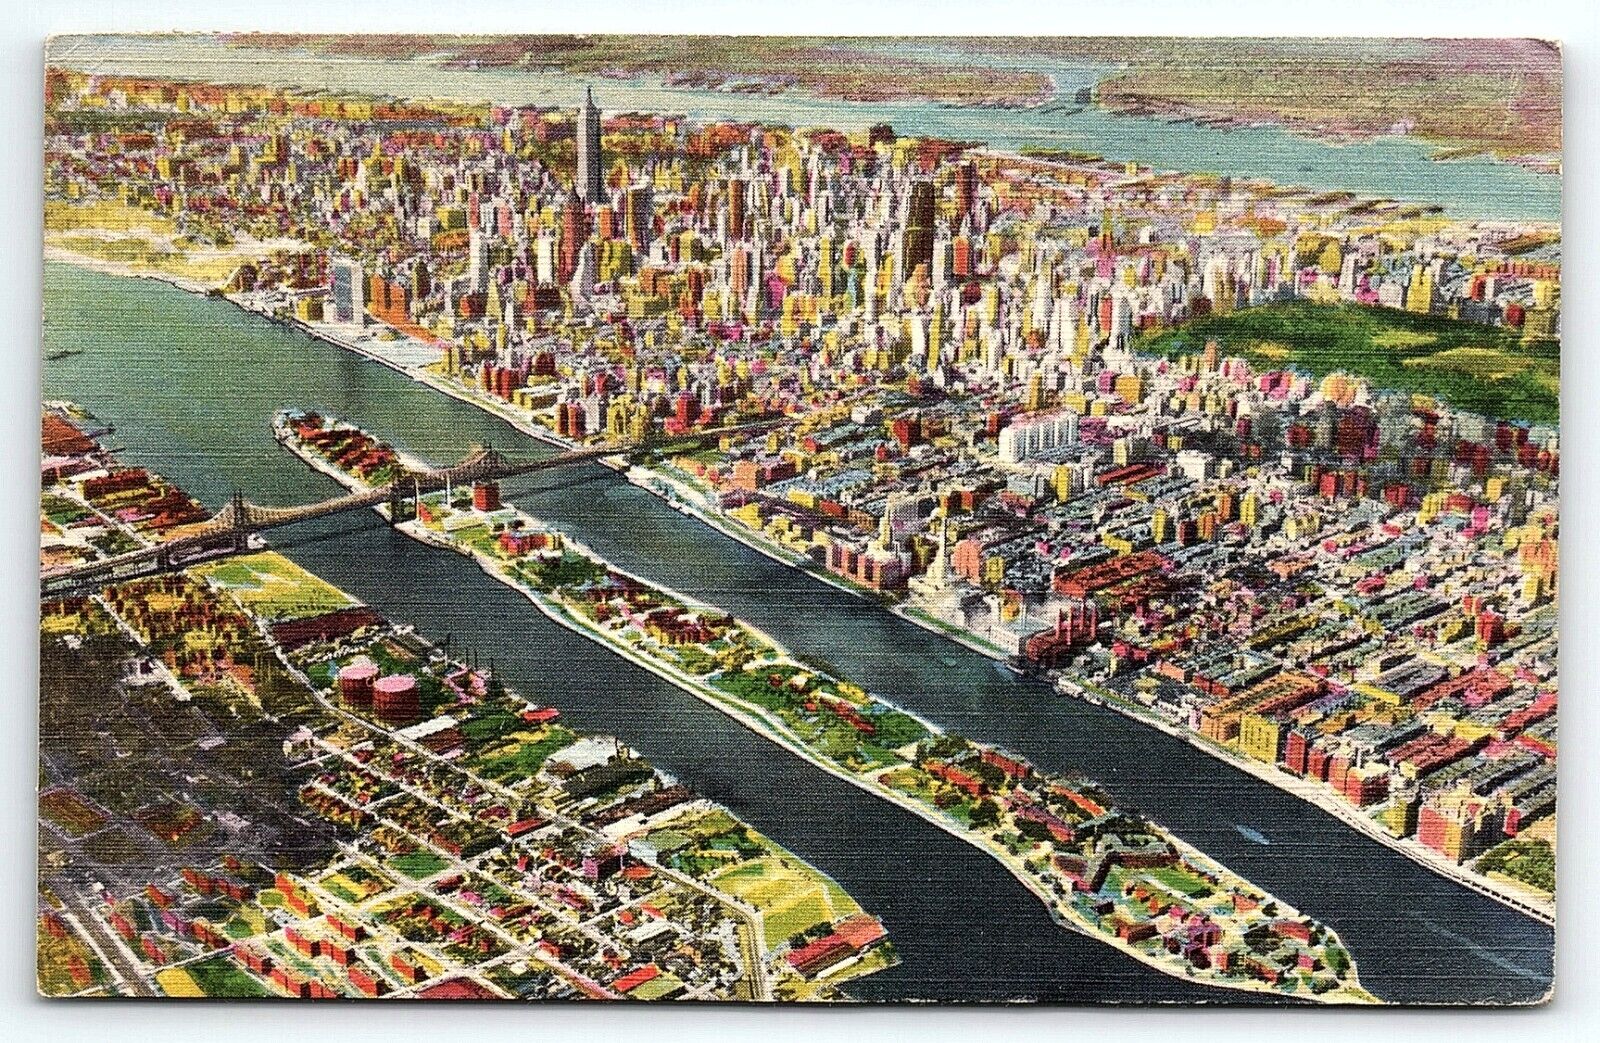 1930s EAST RIVER AND MANHATTAN SKYLINE FROM AIR NEW YORK LINEN POSTCARD P2534